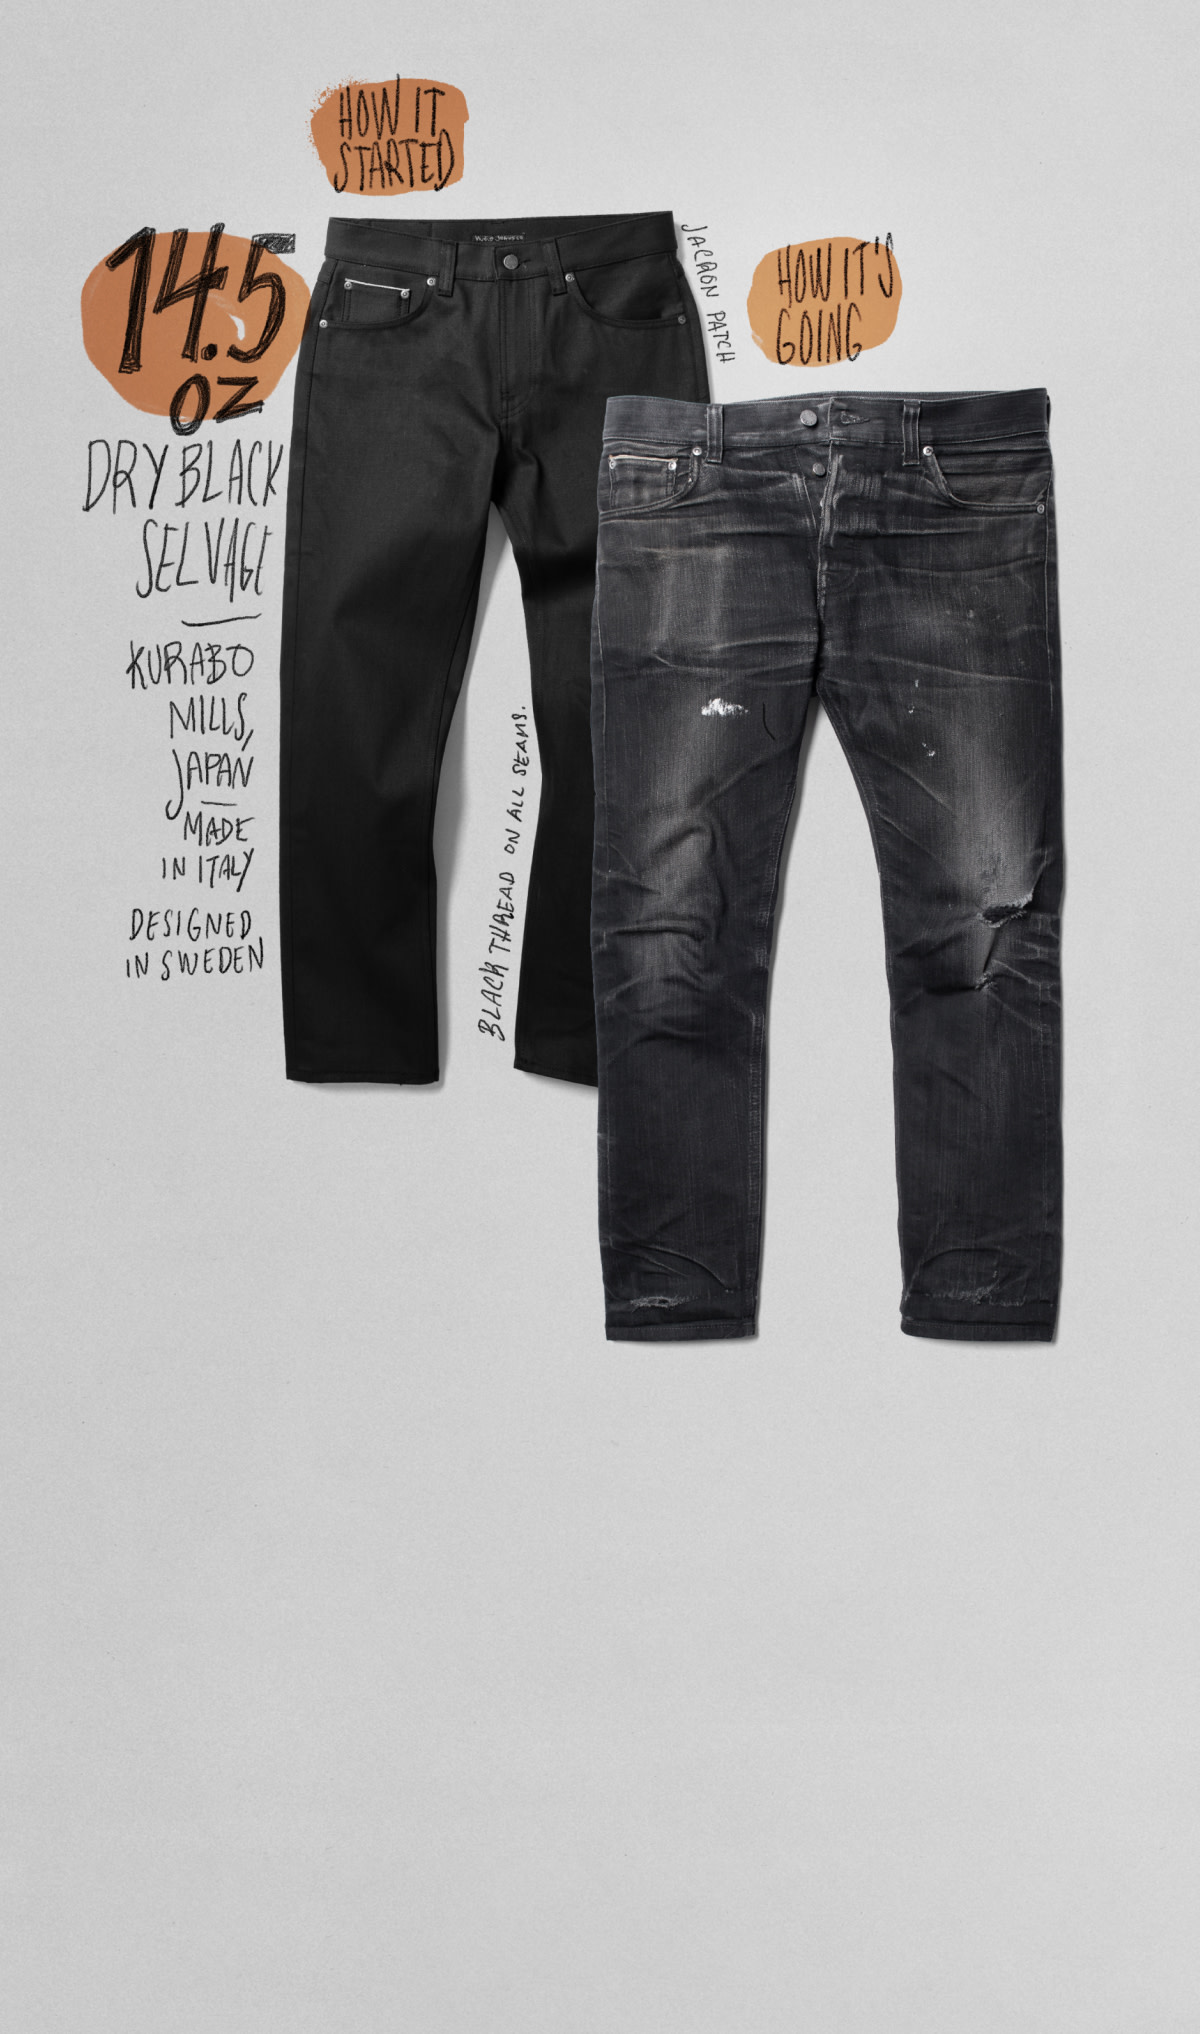 Black Selvage Life Hack Wear Black Dry To Worn, How it started how it's going